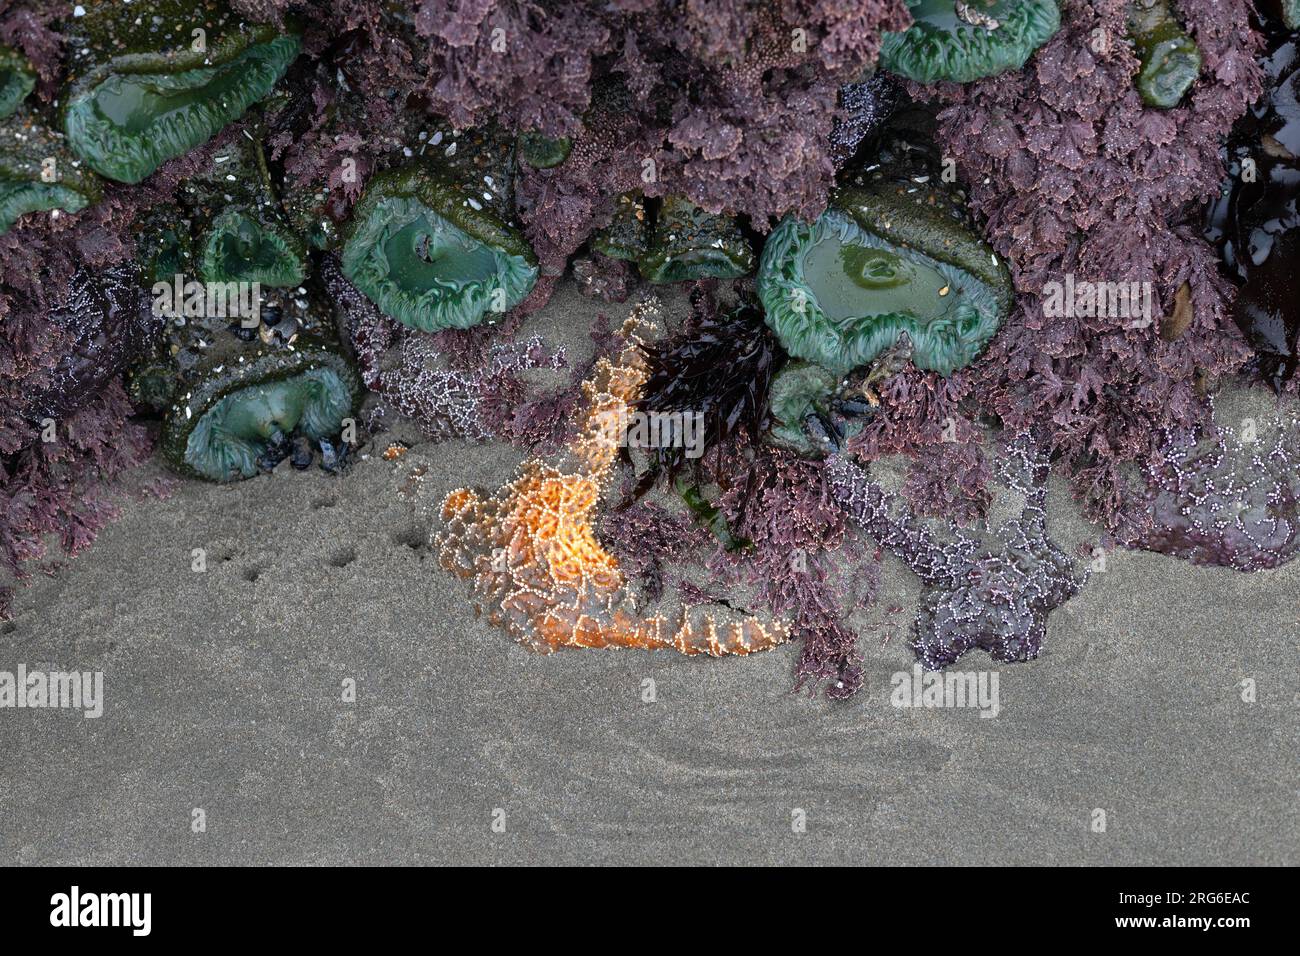 Anemones and other sea life clinging to a sea stack rock revealed during an ultra low tide in Bandon, Oregon. Stock Photo